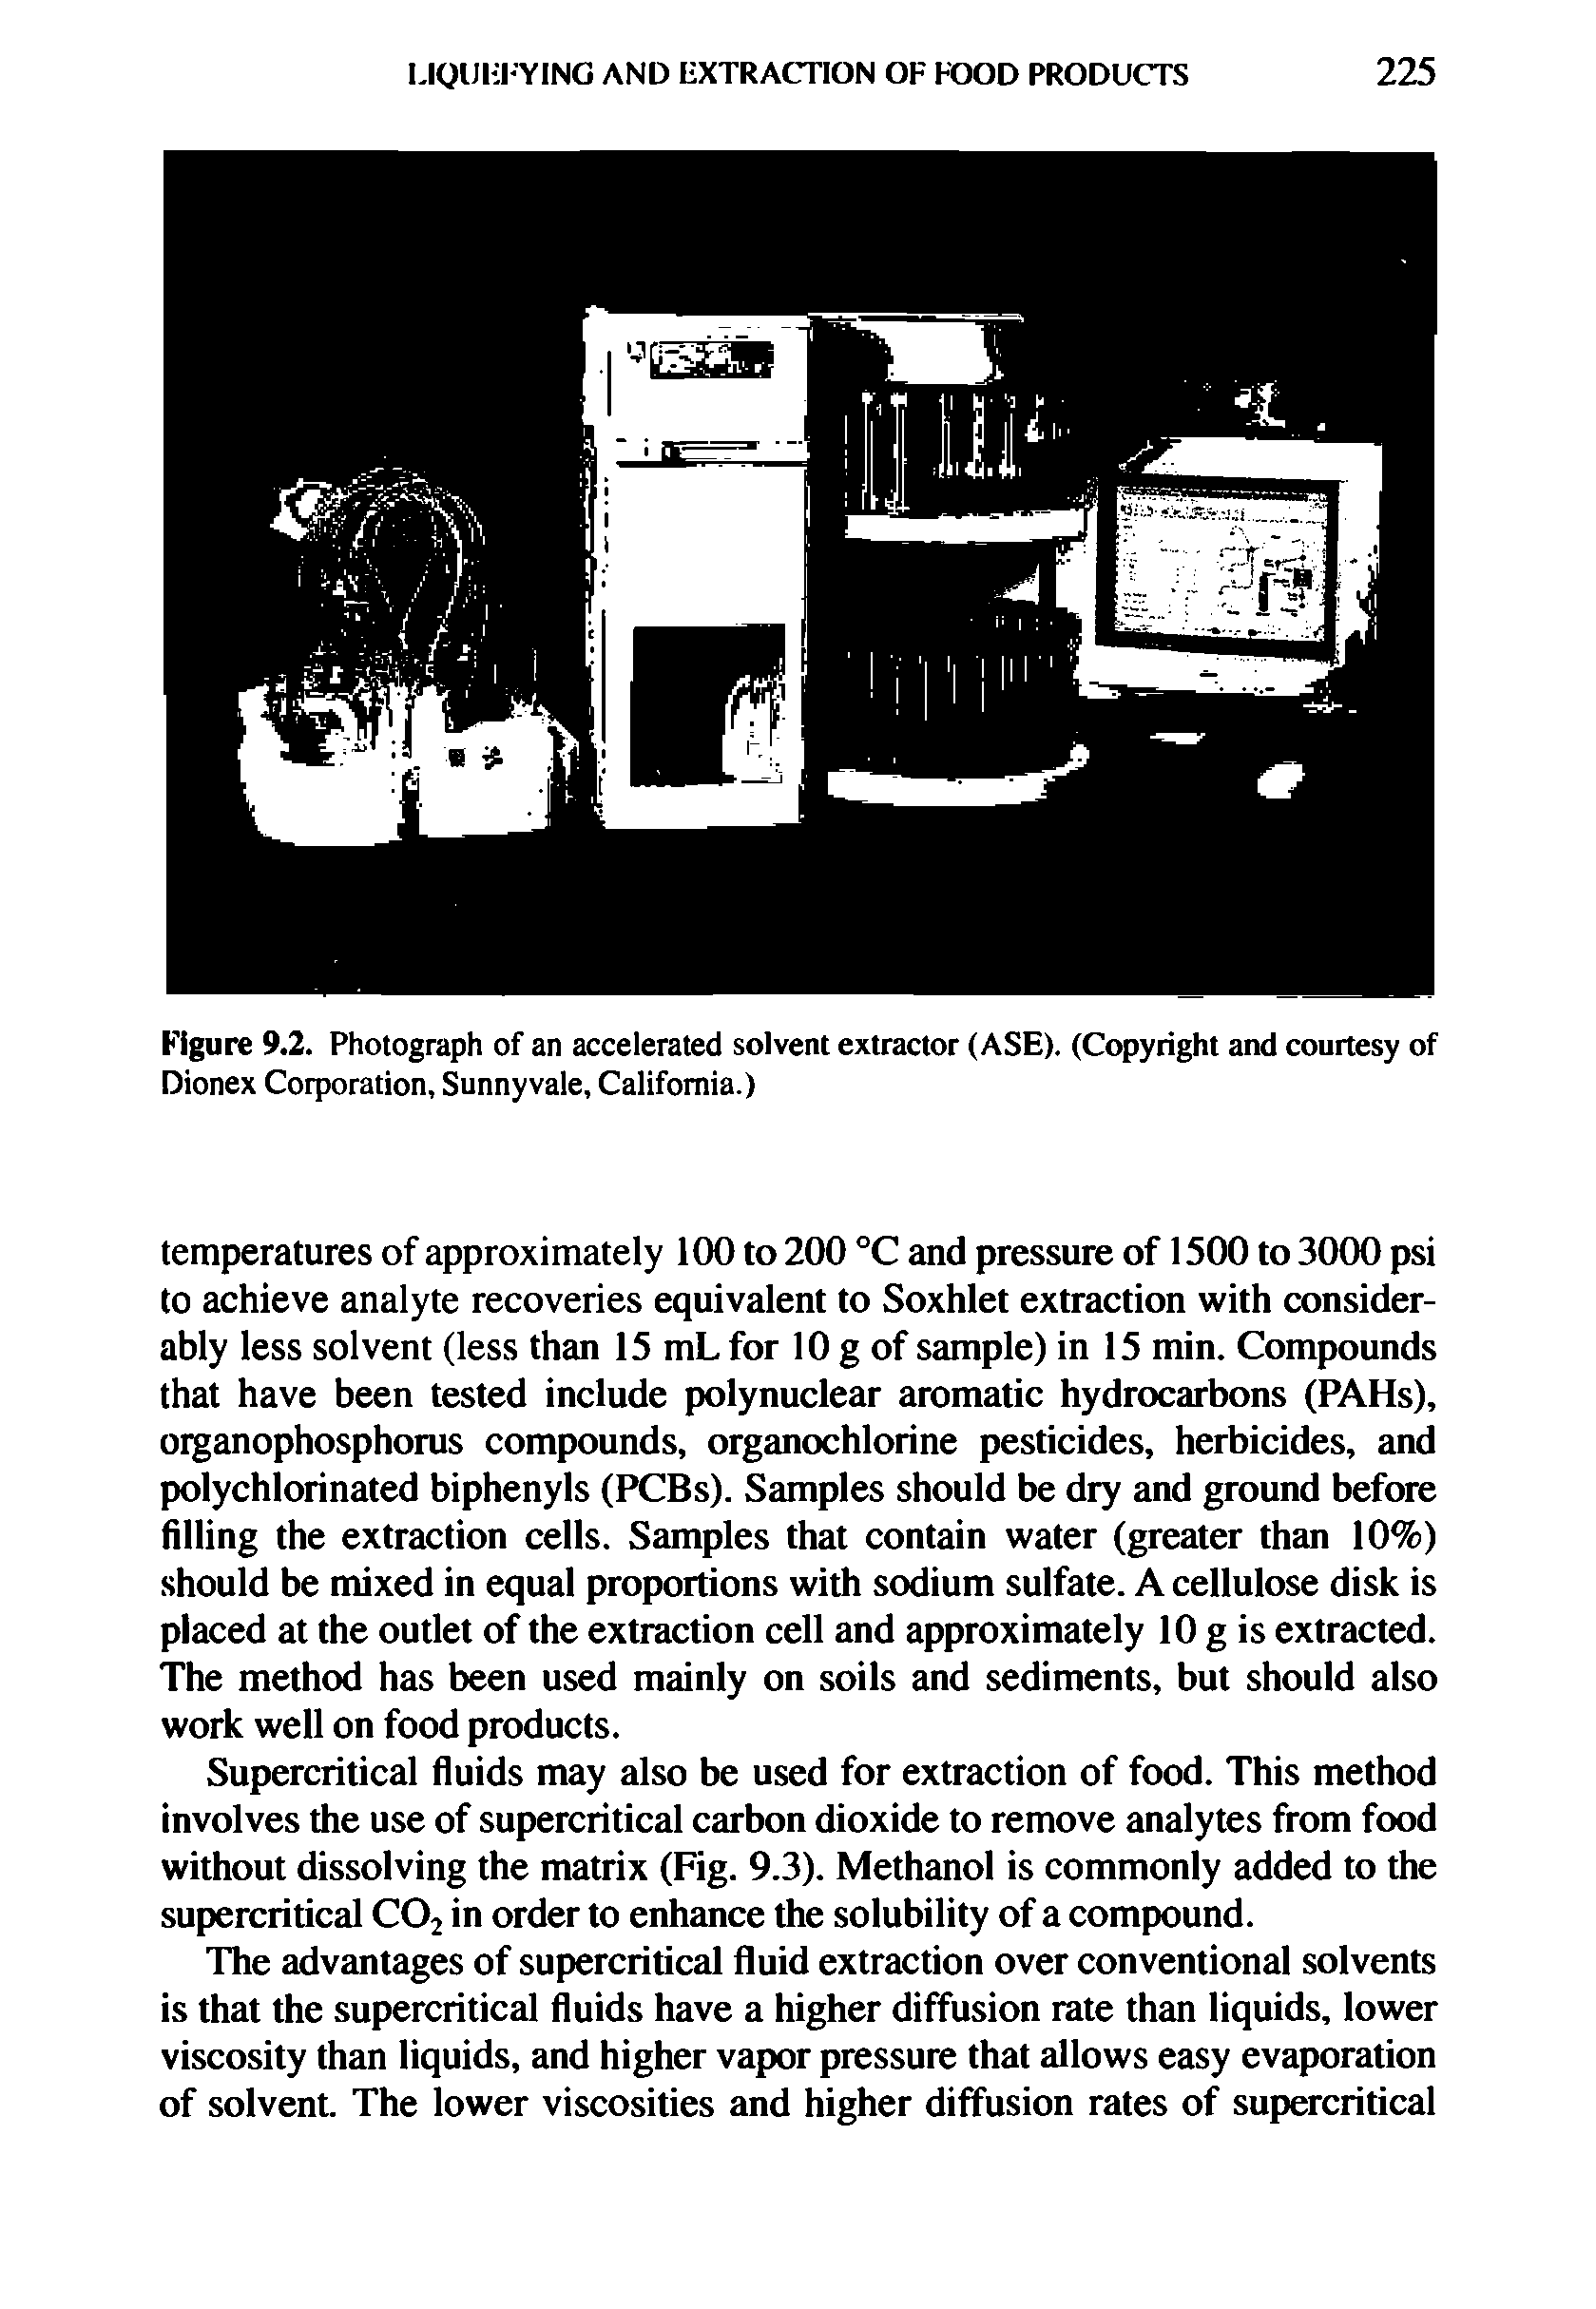 Figure 9.2. Photograph of an accelerated solvent extractor (ASE). (Copyright and courtesy of Dionex Corporation, Sunnyvale, California.)...